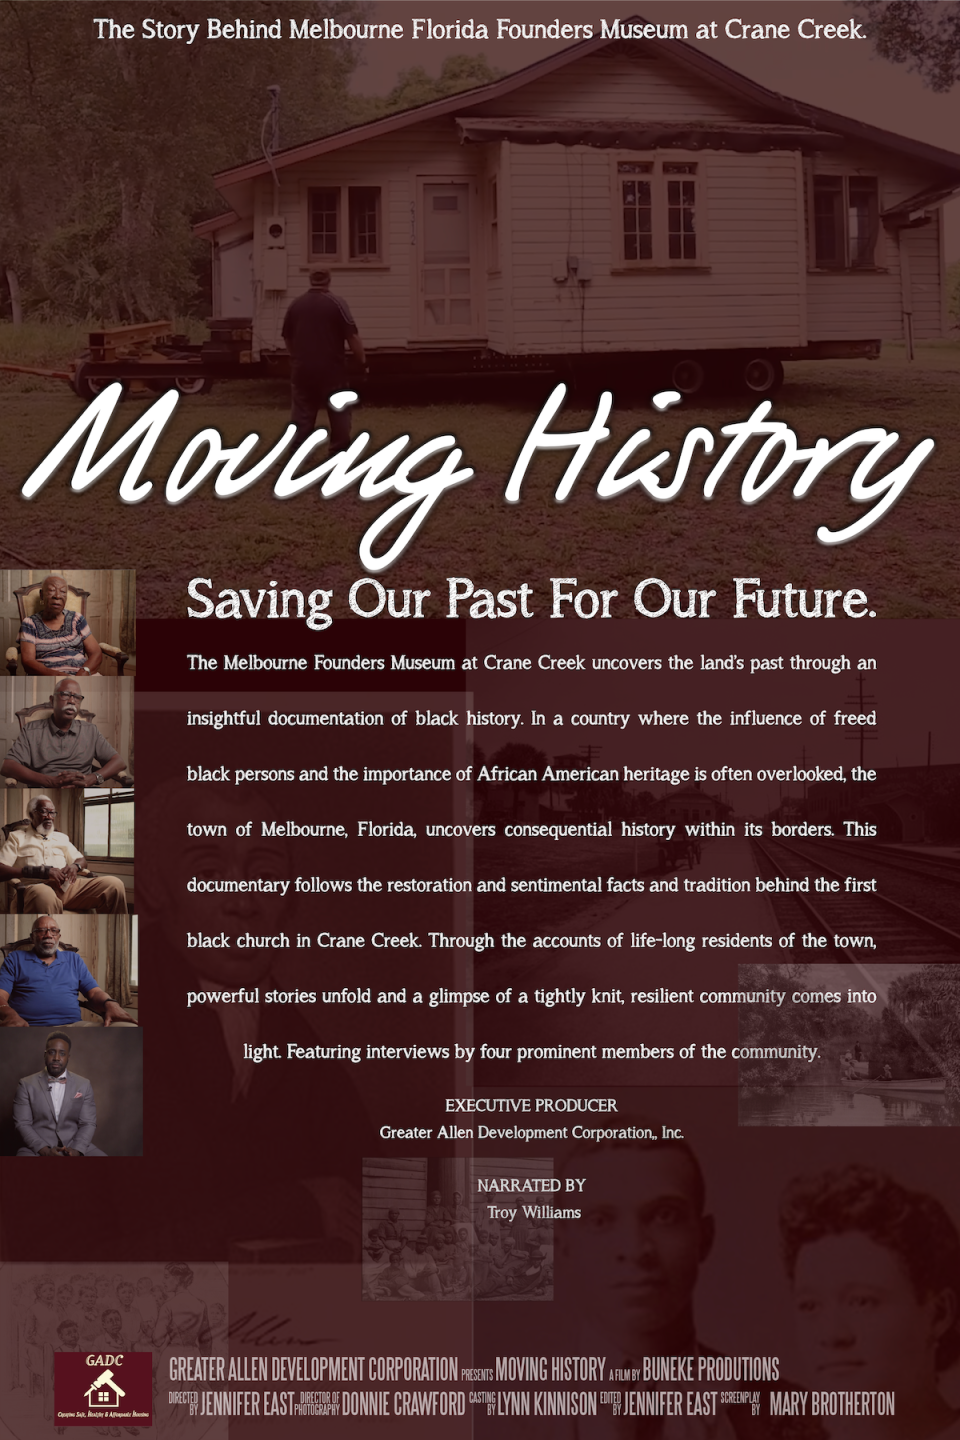 The "Moving History" movie poster.